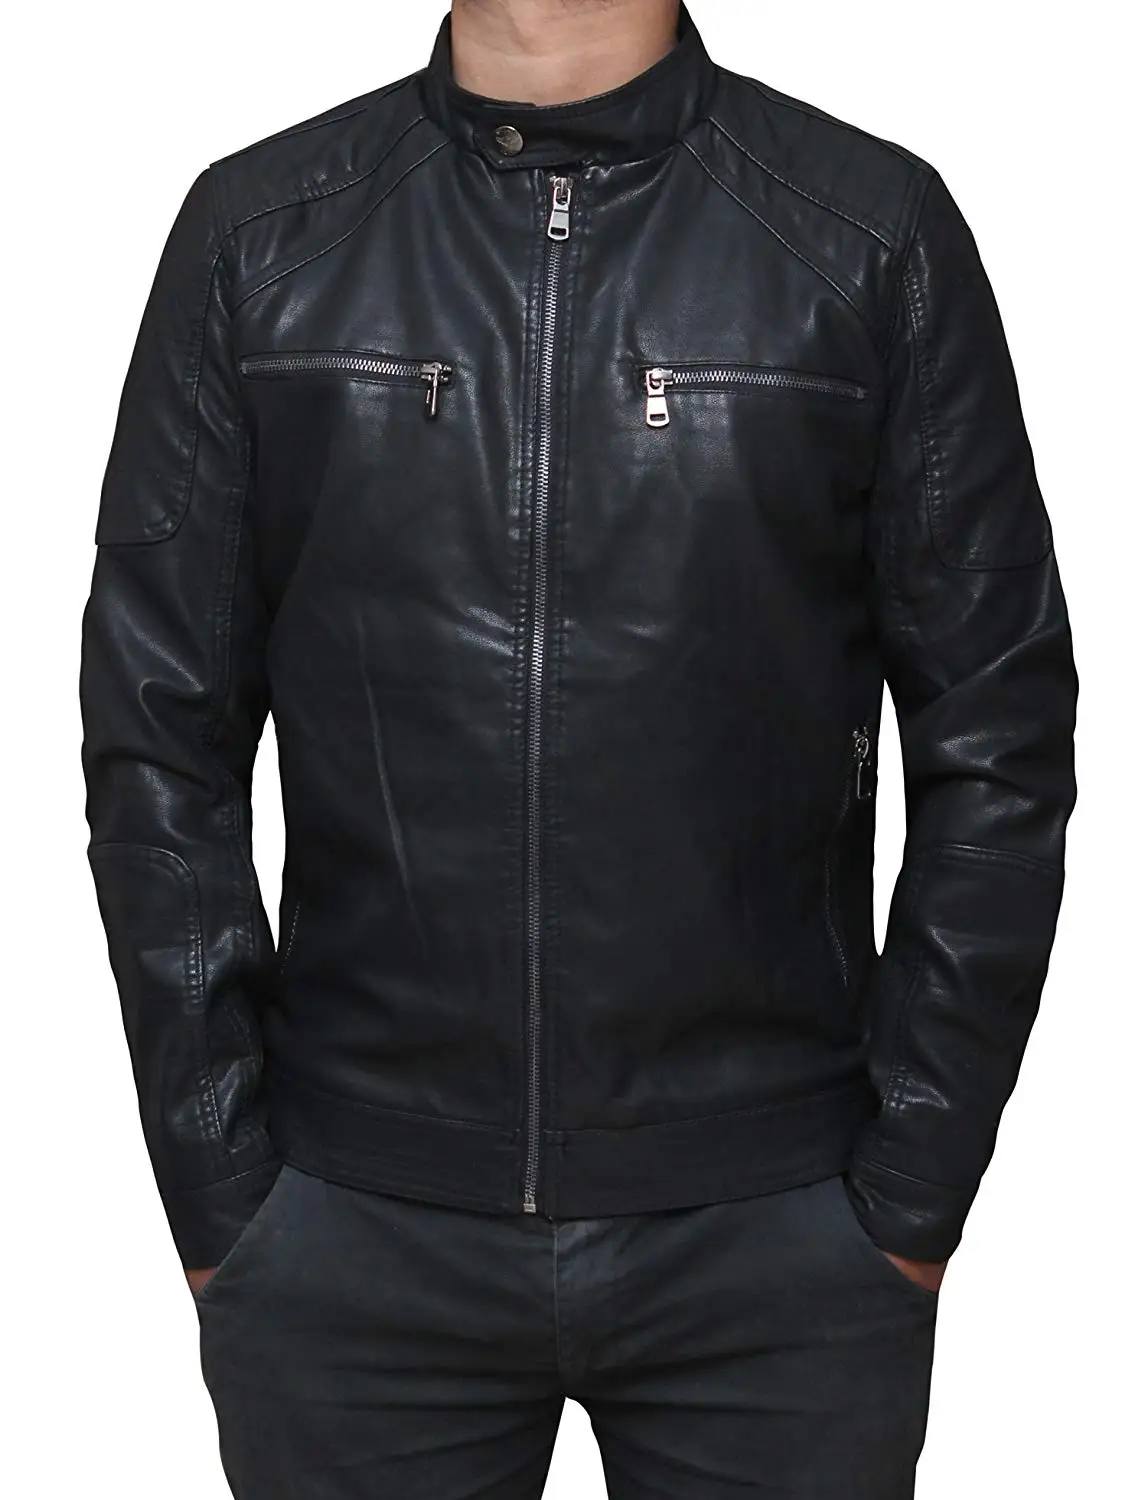 Cheap Cool Jackets, find Cool Jackets deals on line at Alibaba.com